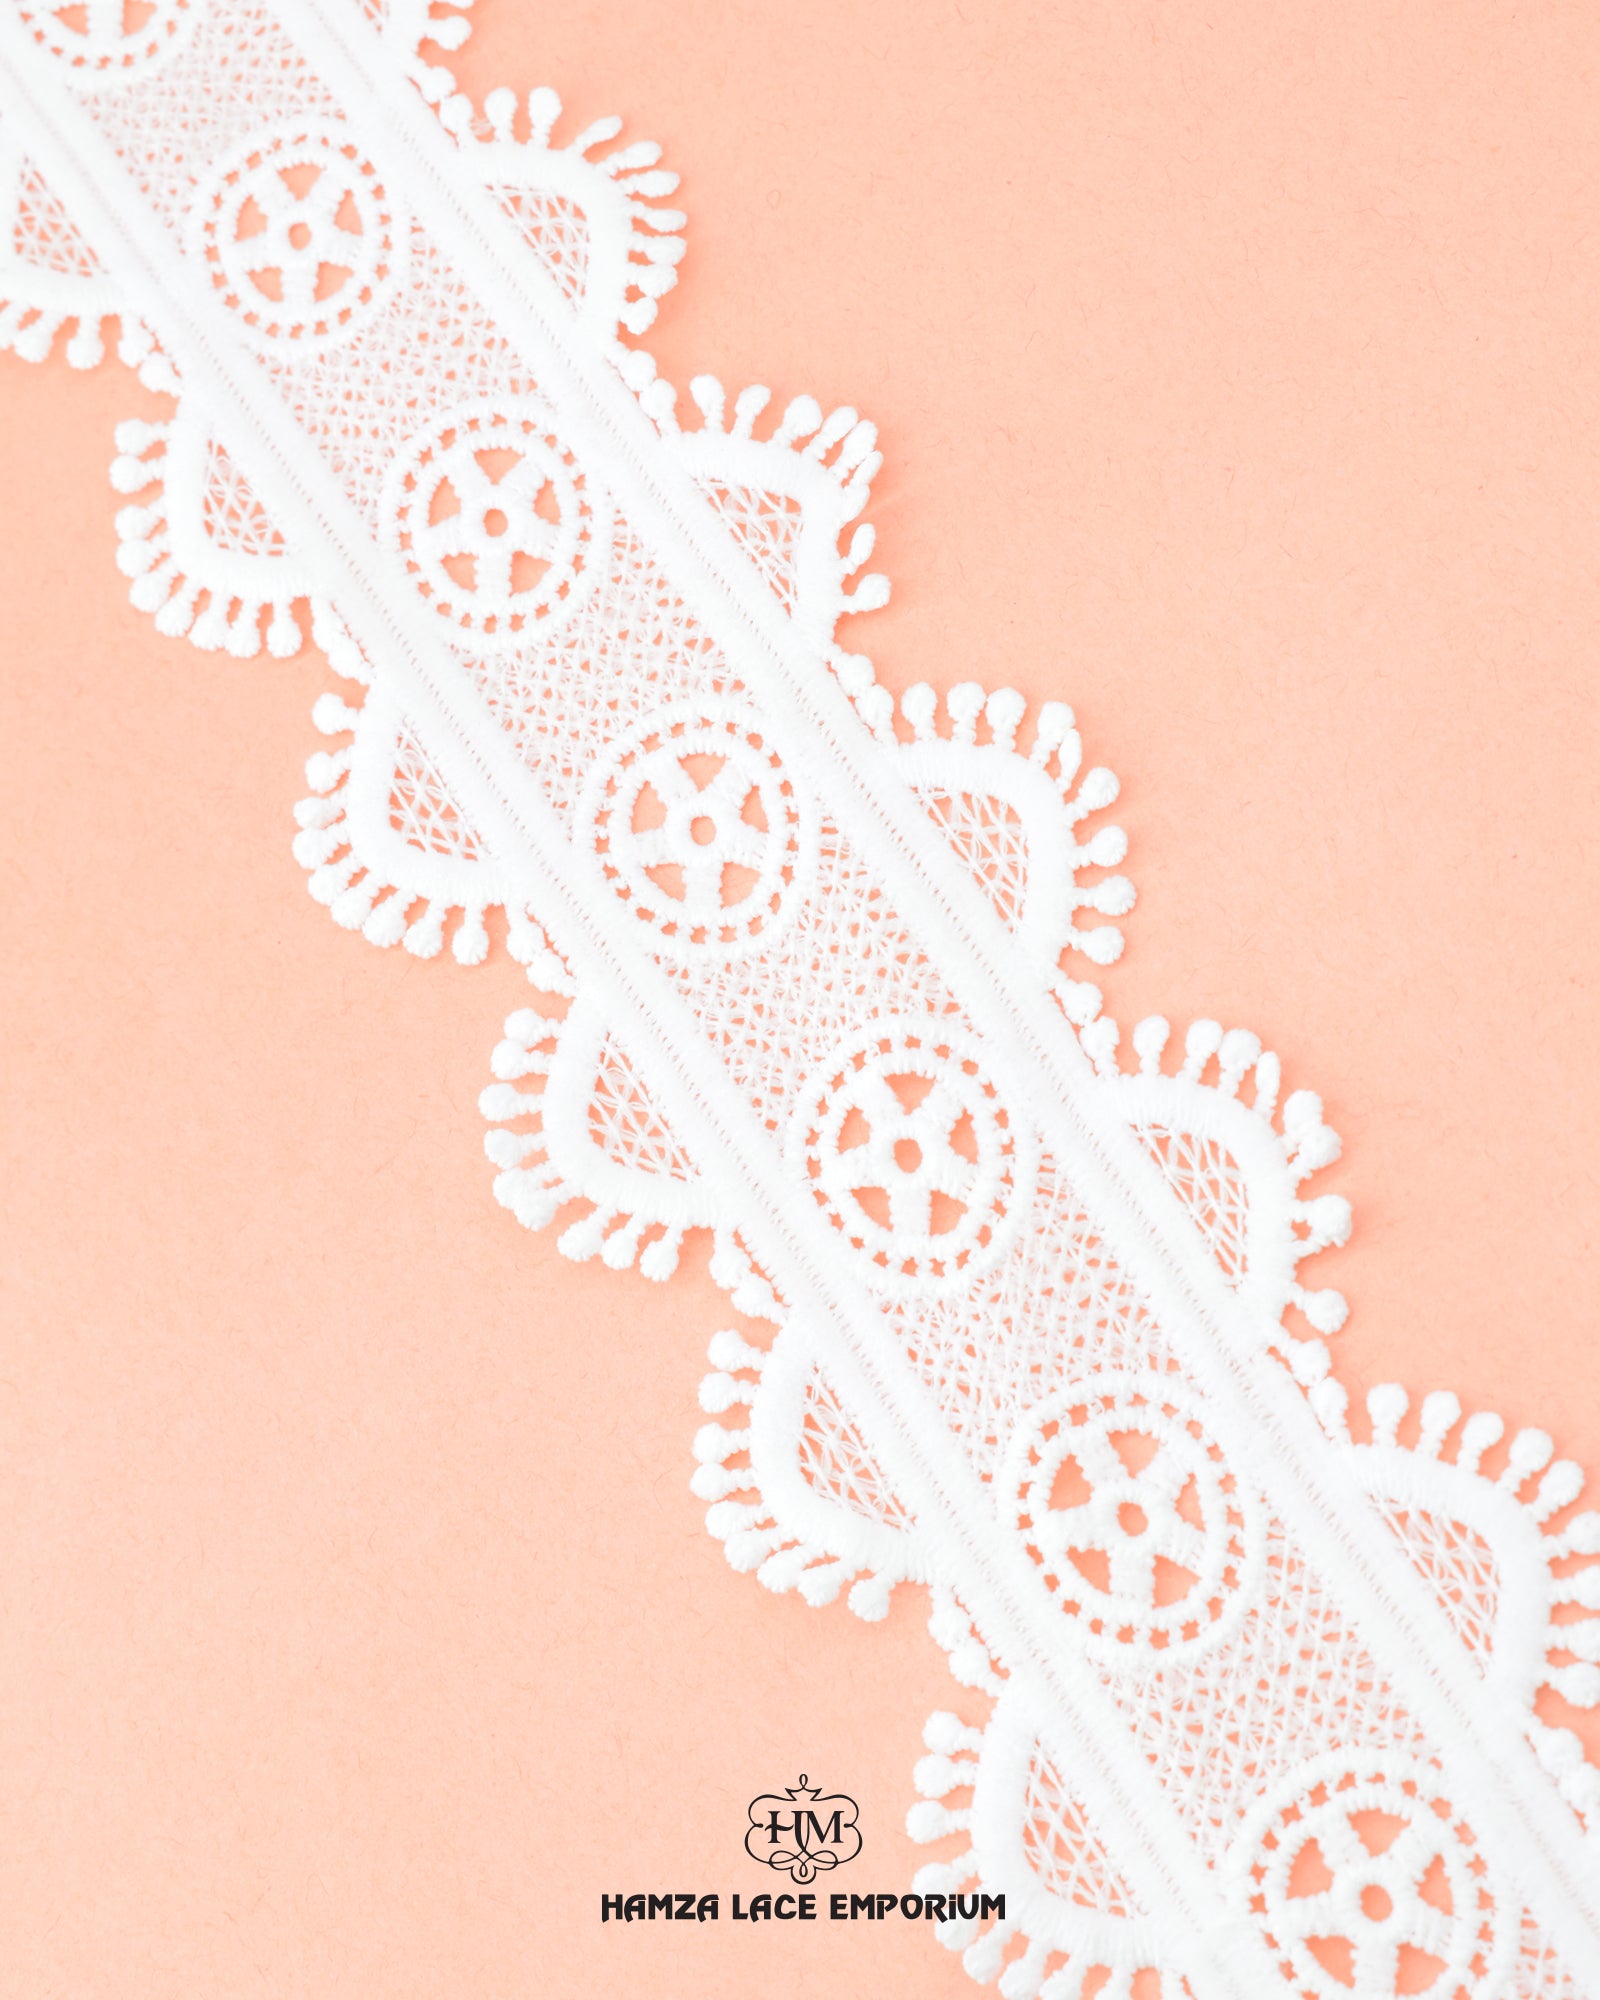 'Center Filling Lace 22424' with the brand name 'Hamza Lace' at the bottom